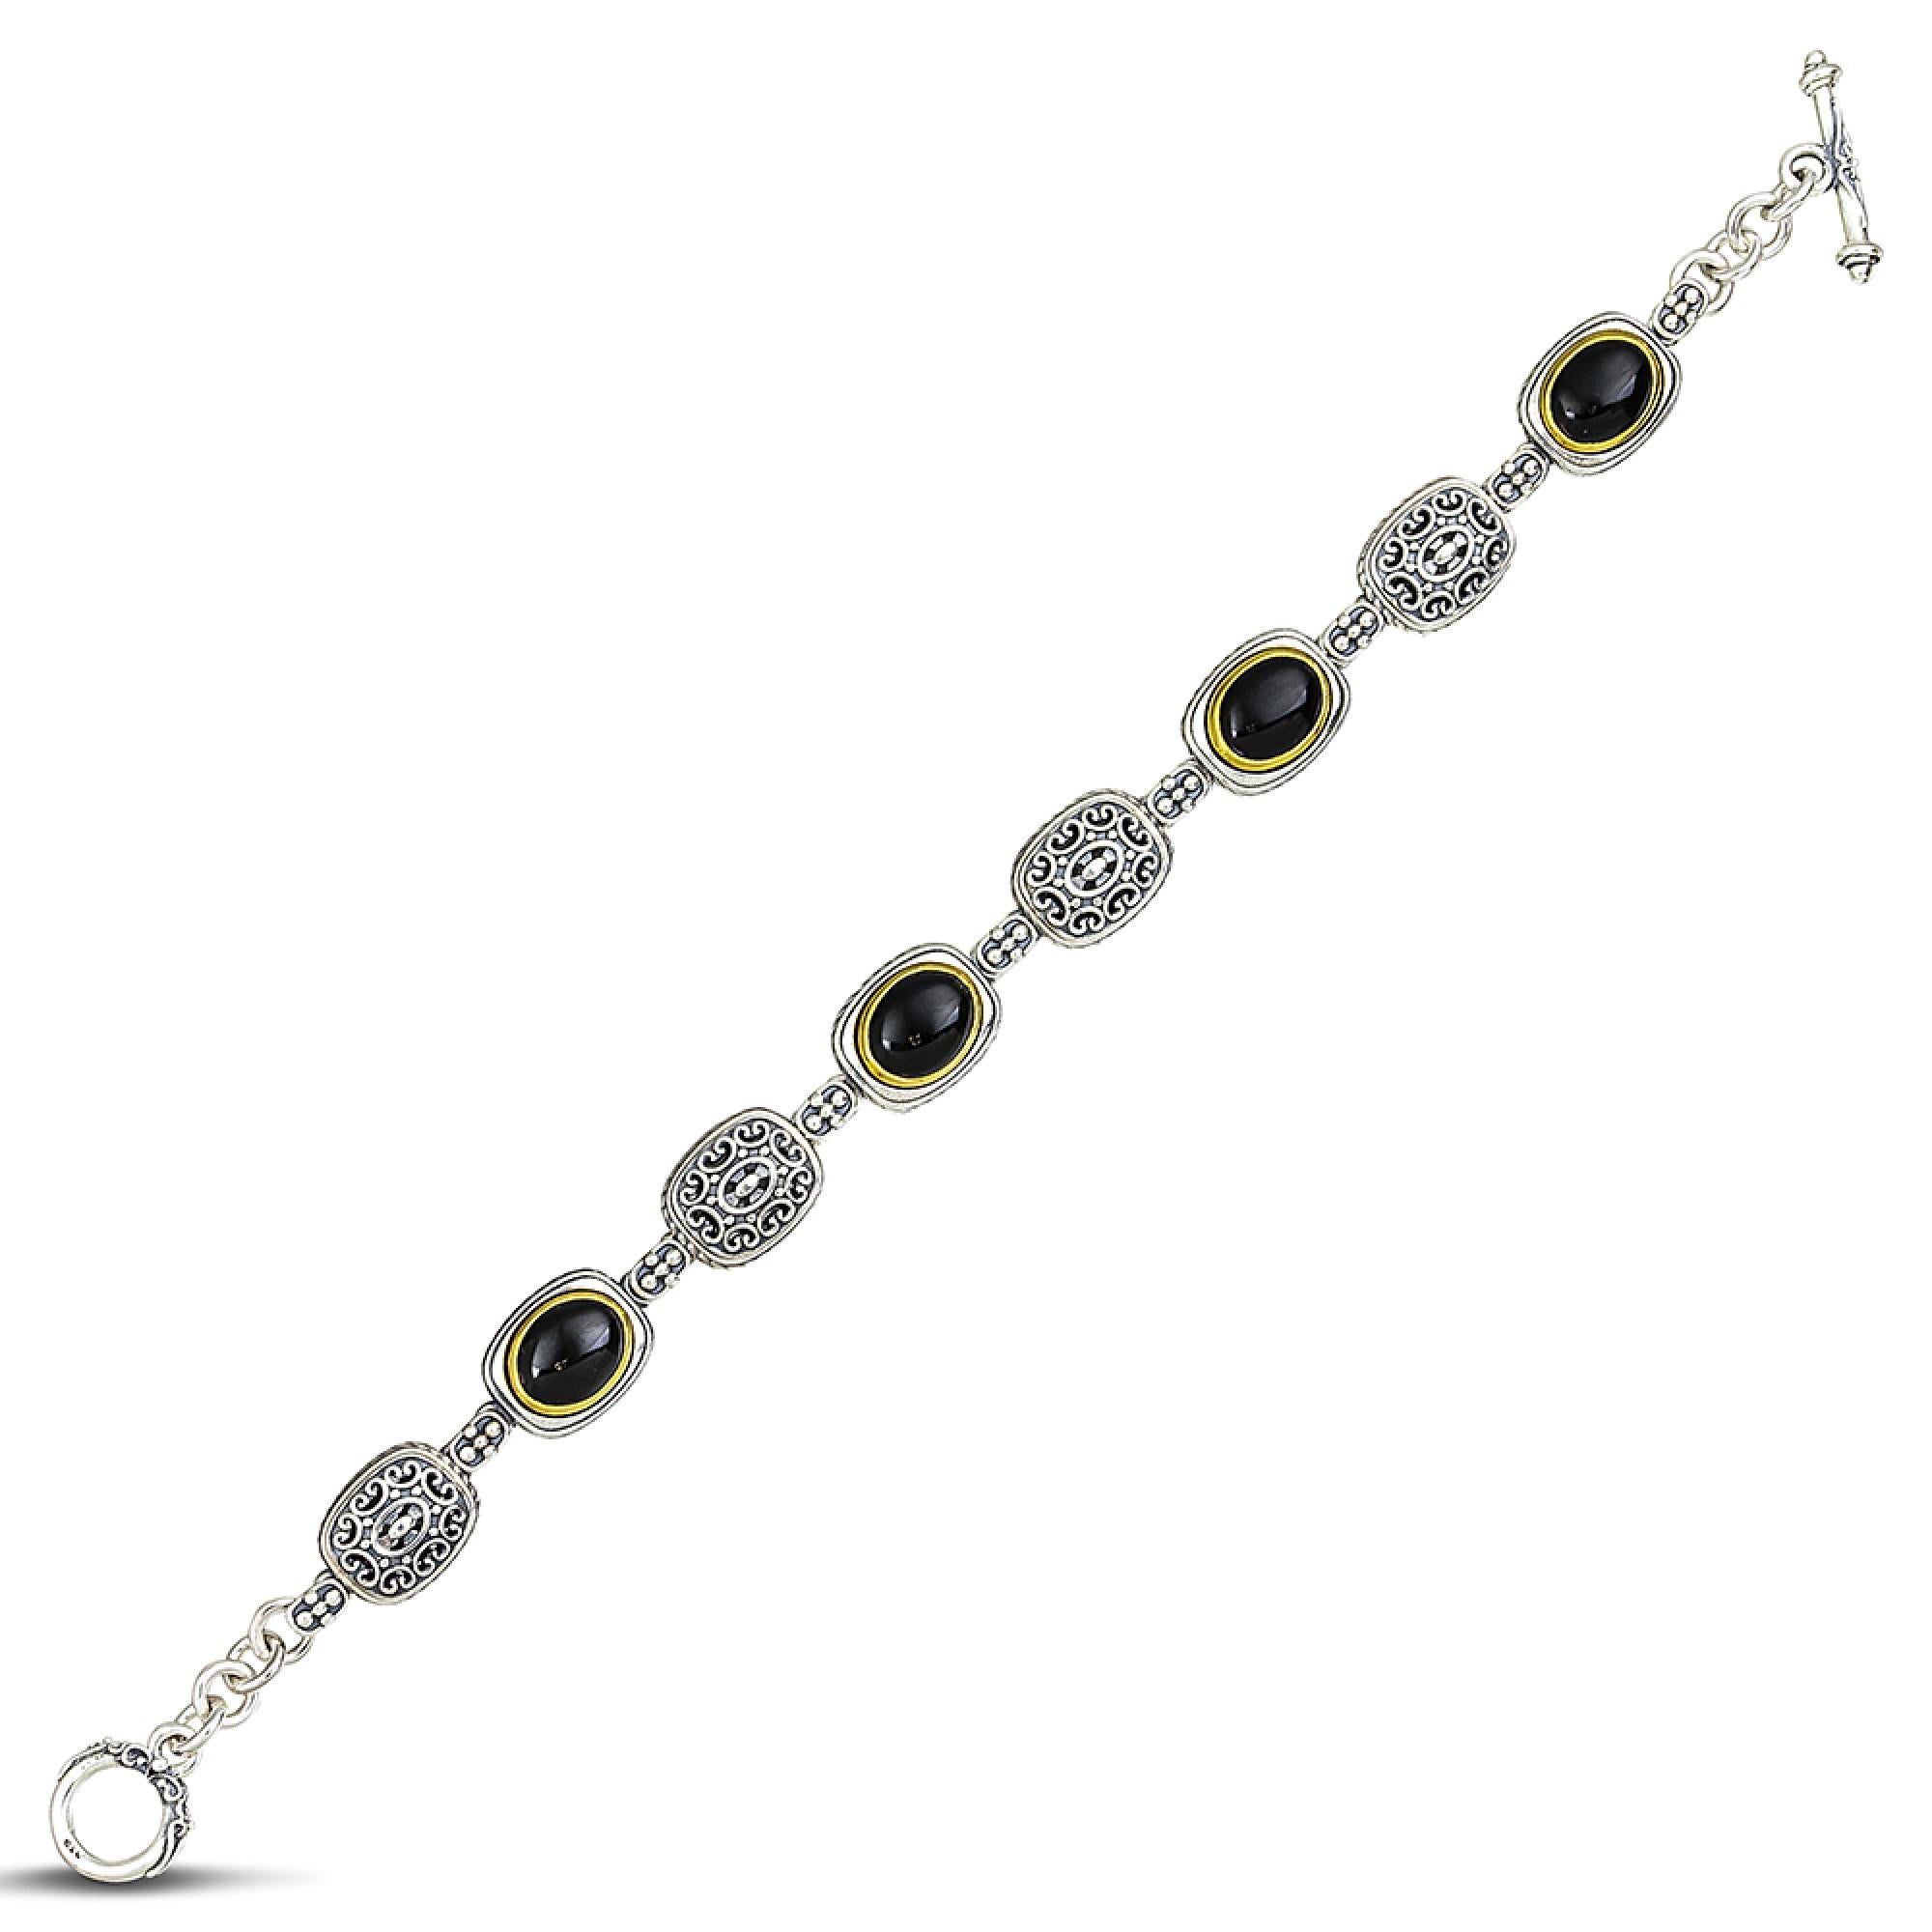 Cabochon Chain Bracelet with Black Onyx in Gold-Plated Bezels, Dimitrios Exclusive B117 For Sale